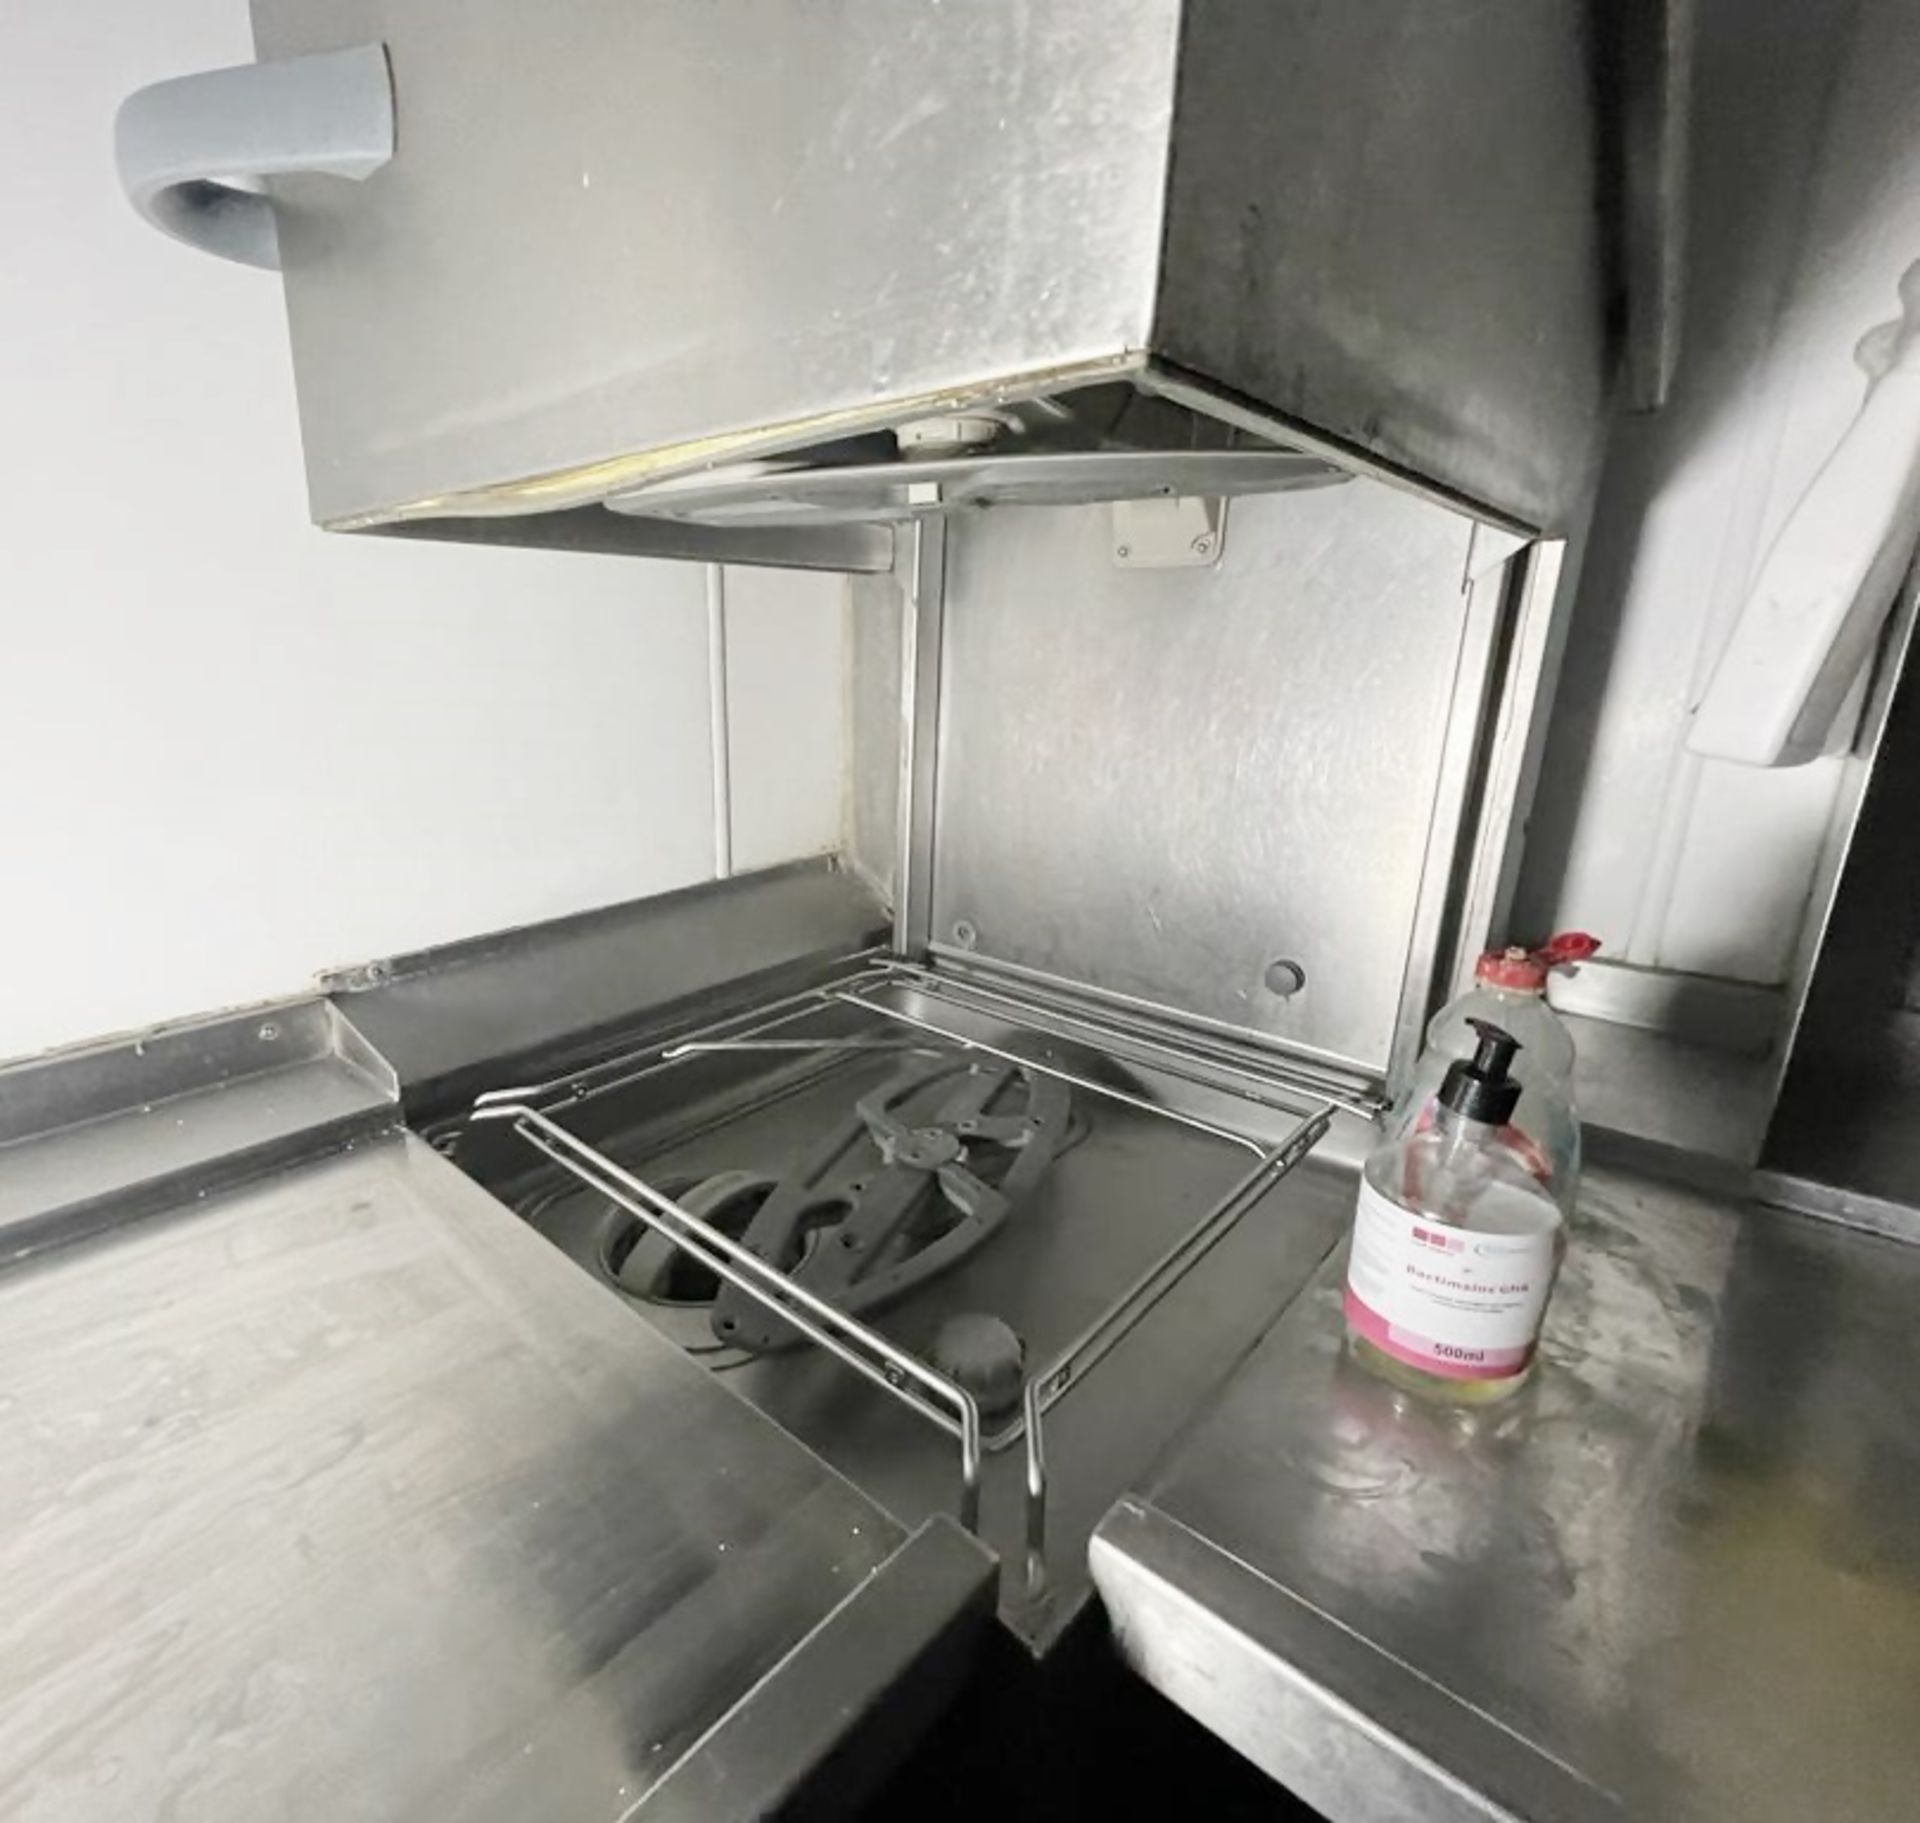 1 x Winterhalter PT-M Passthrough Dishwasher With Inlet and Outlet Table - Image 5 of 12